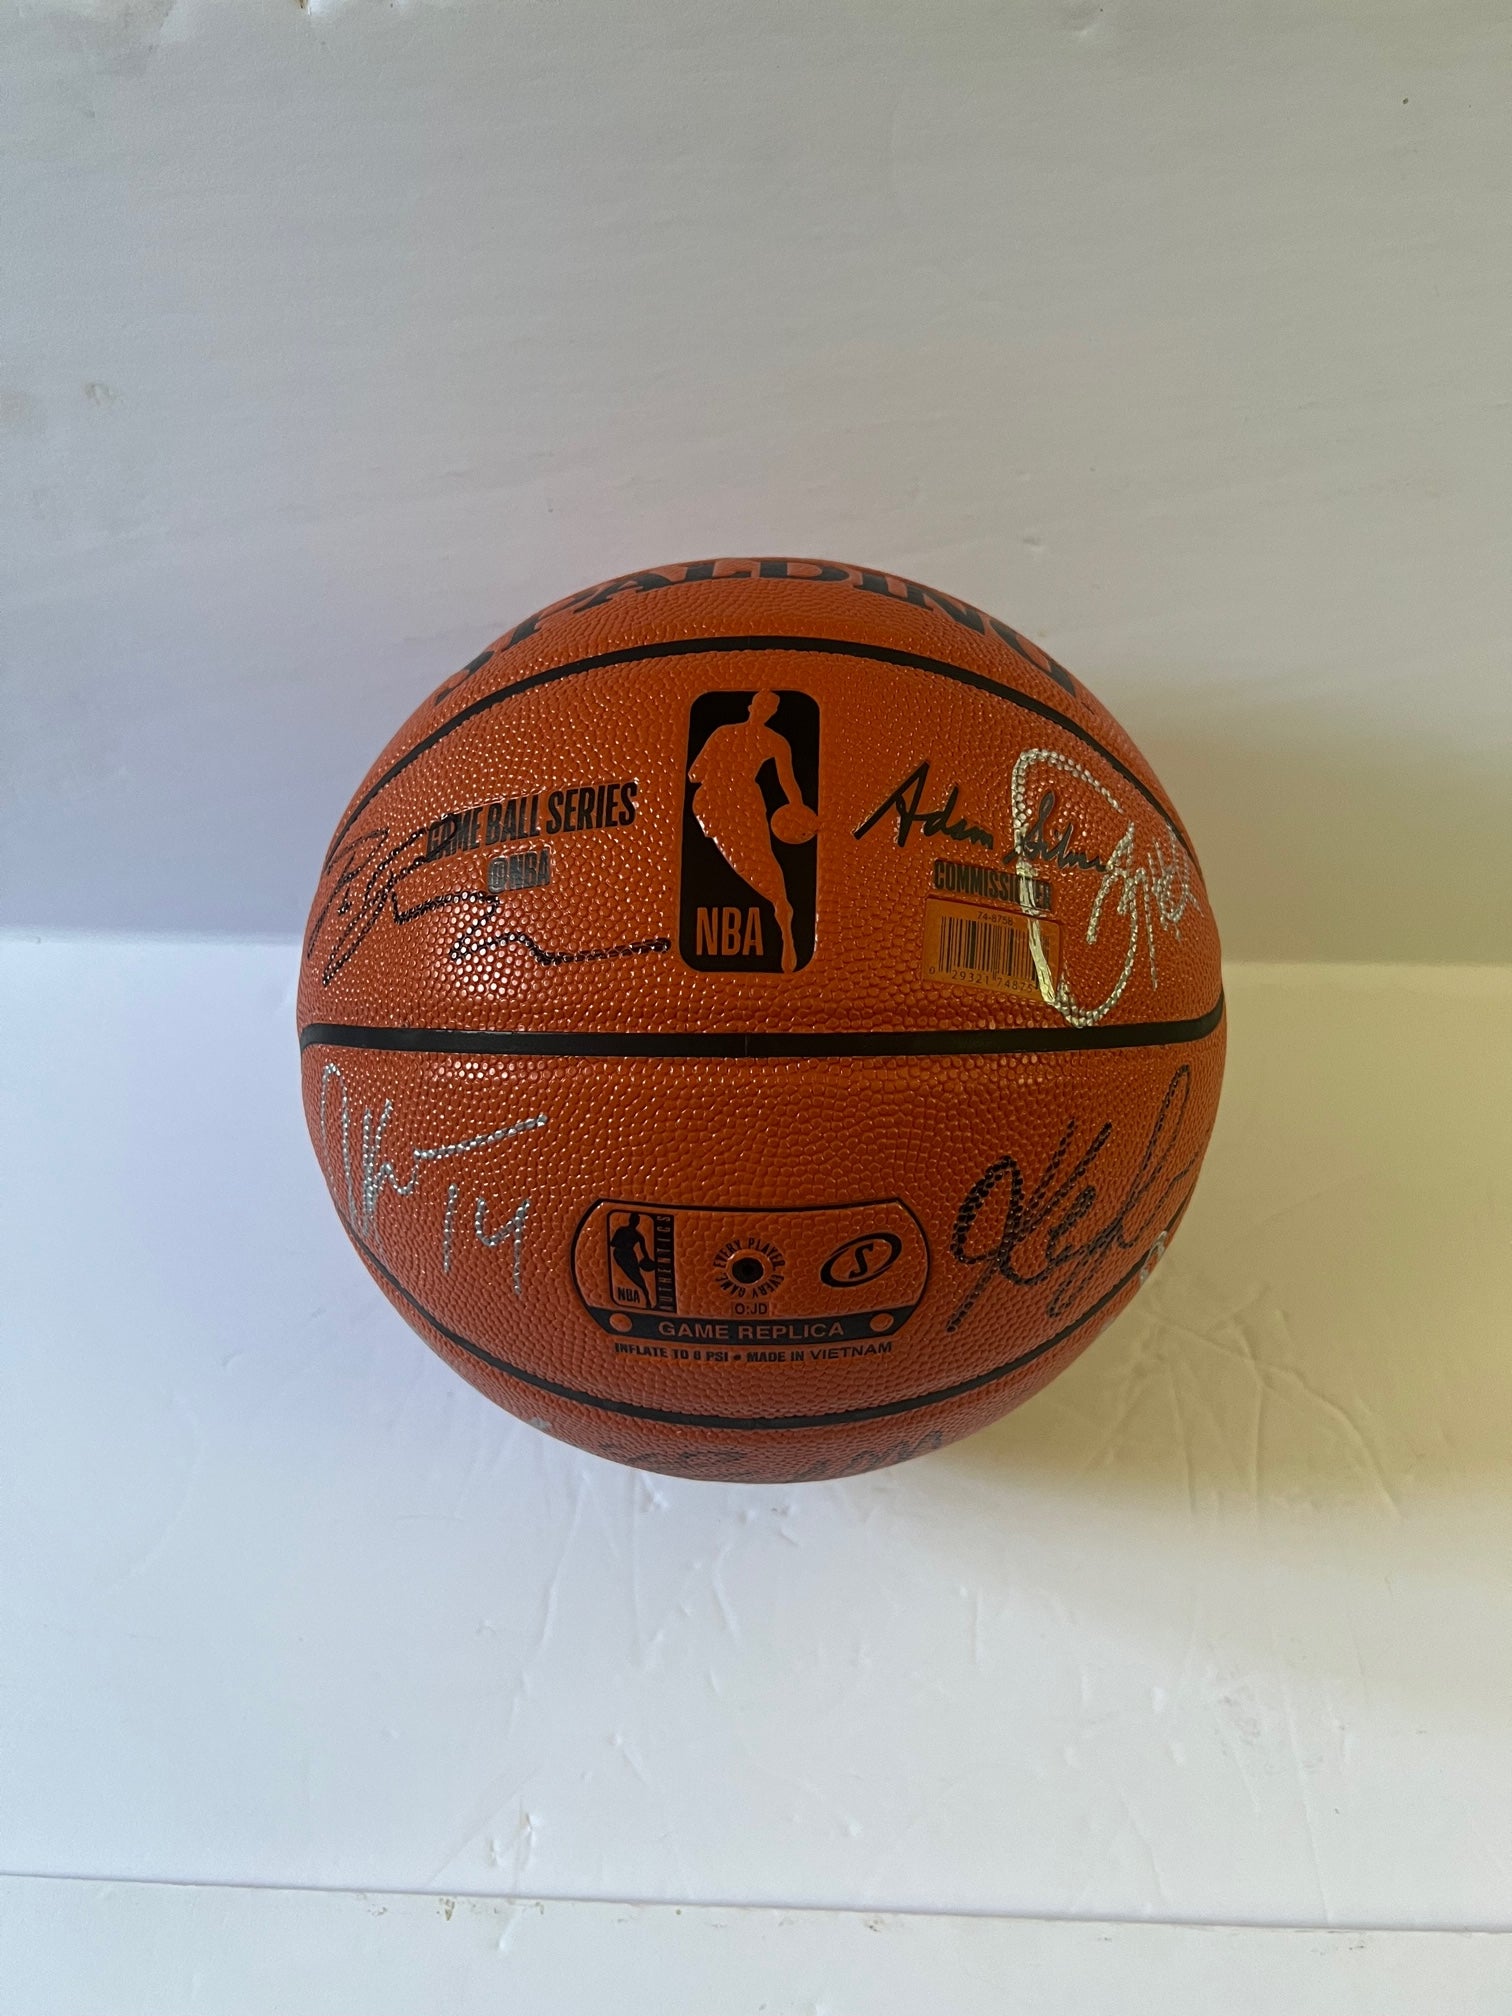 Cleveland Cavaliers LeBron James NBA Champions Spaulding NBA Game series team signed basketball with proof